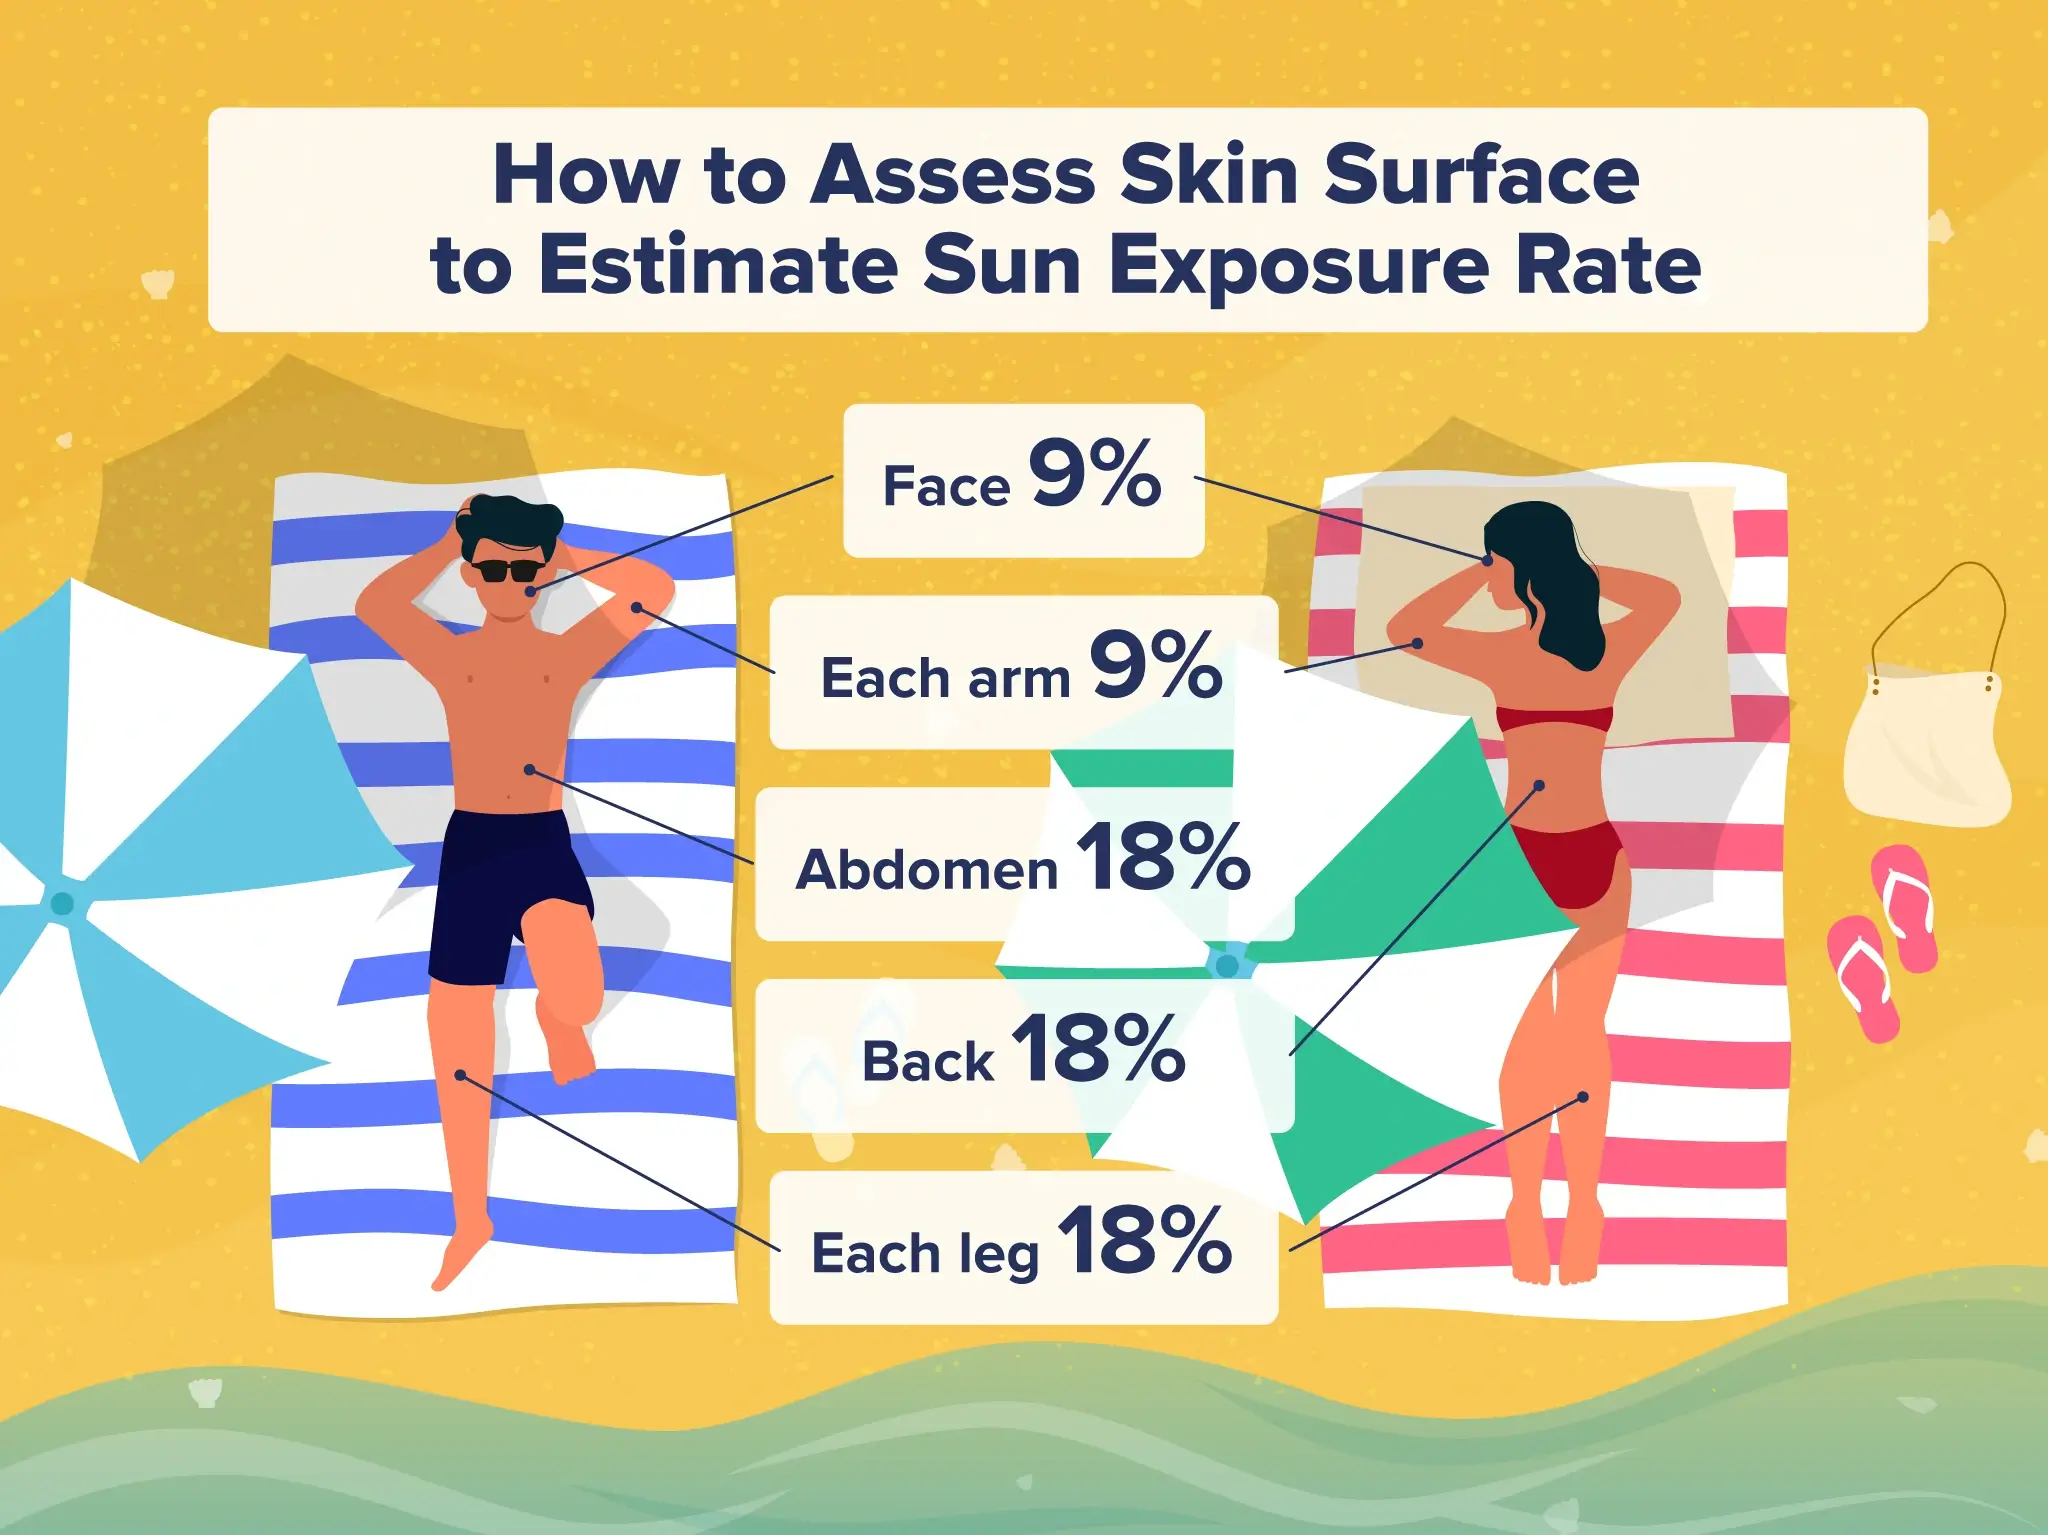 infographic breaking down how to assess skin surface to estimate sun exposure rate.